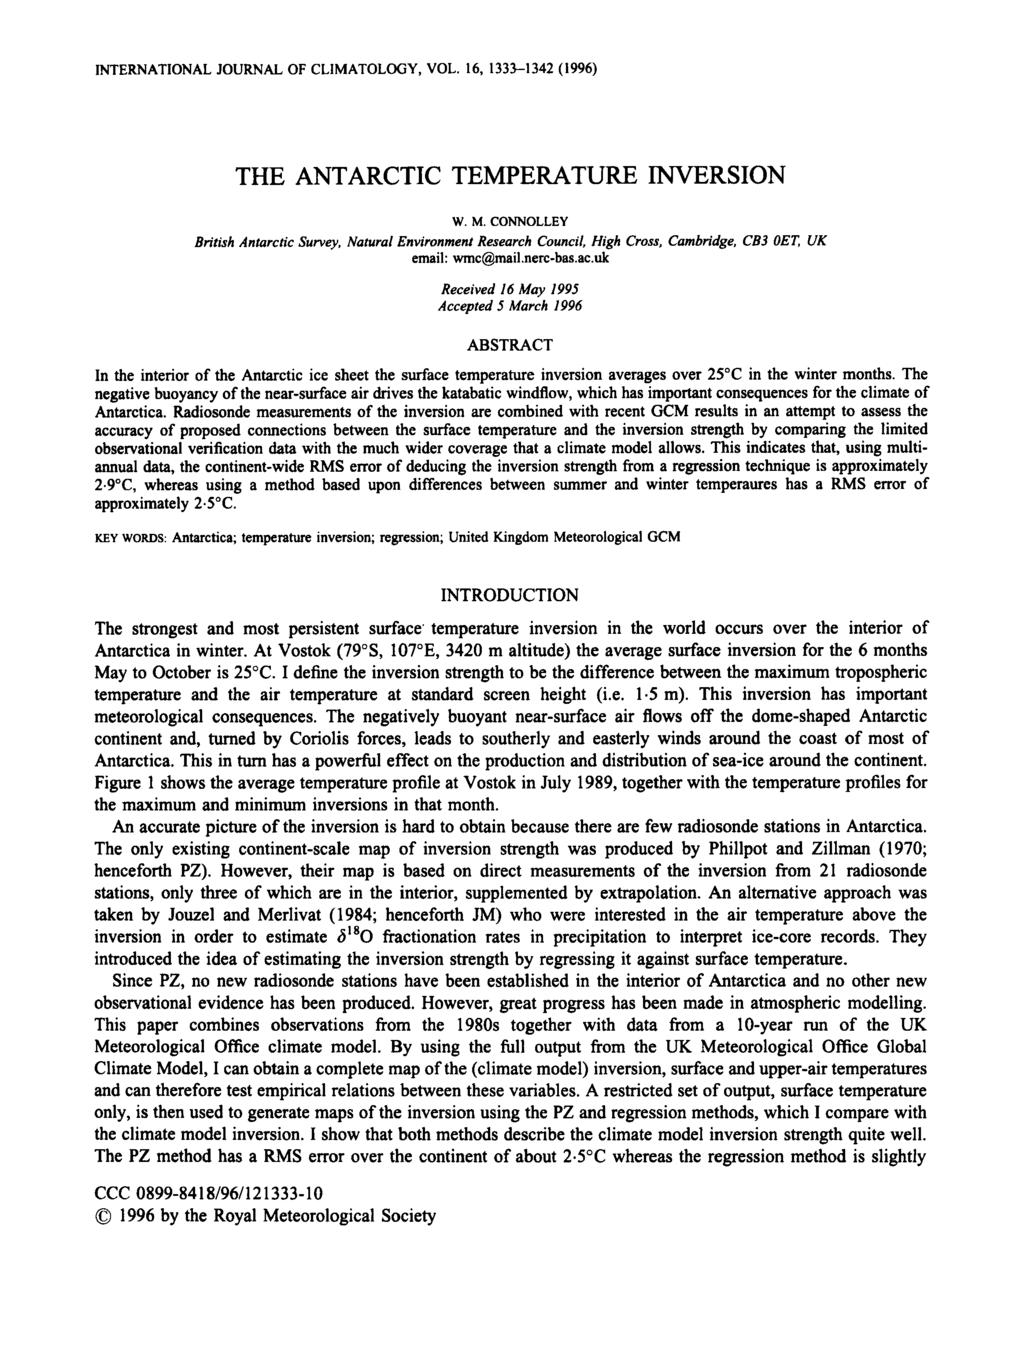 INTERNATIONAL JOURNAL OF CLIMATOLOGY, VOL. 16, 1333-1342 (1996) THE ANTARCTIC TEMPERATURE INVERSION W. M.